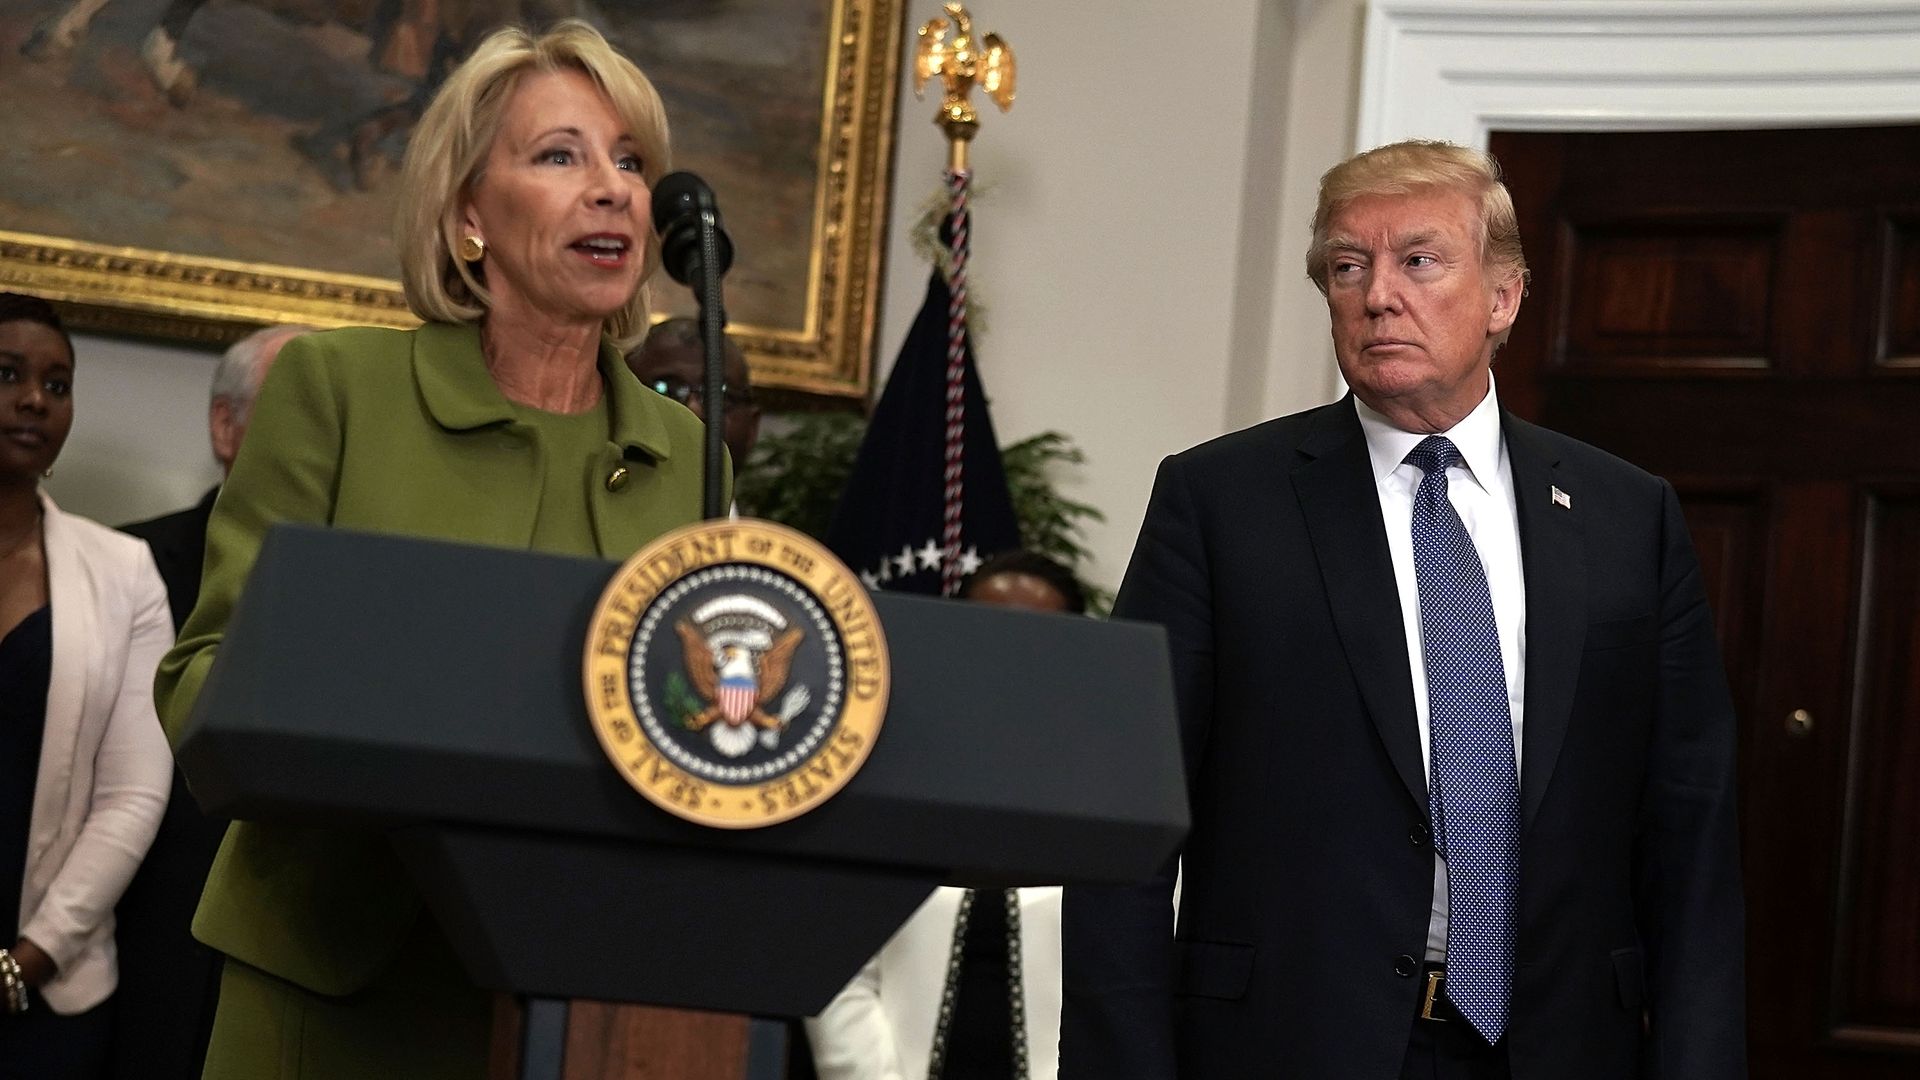 Education Secretary Betsy DeVos and President Donald Trump. Photo: Alex Wong/Getty Images